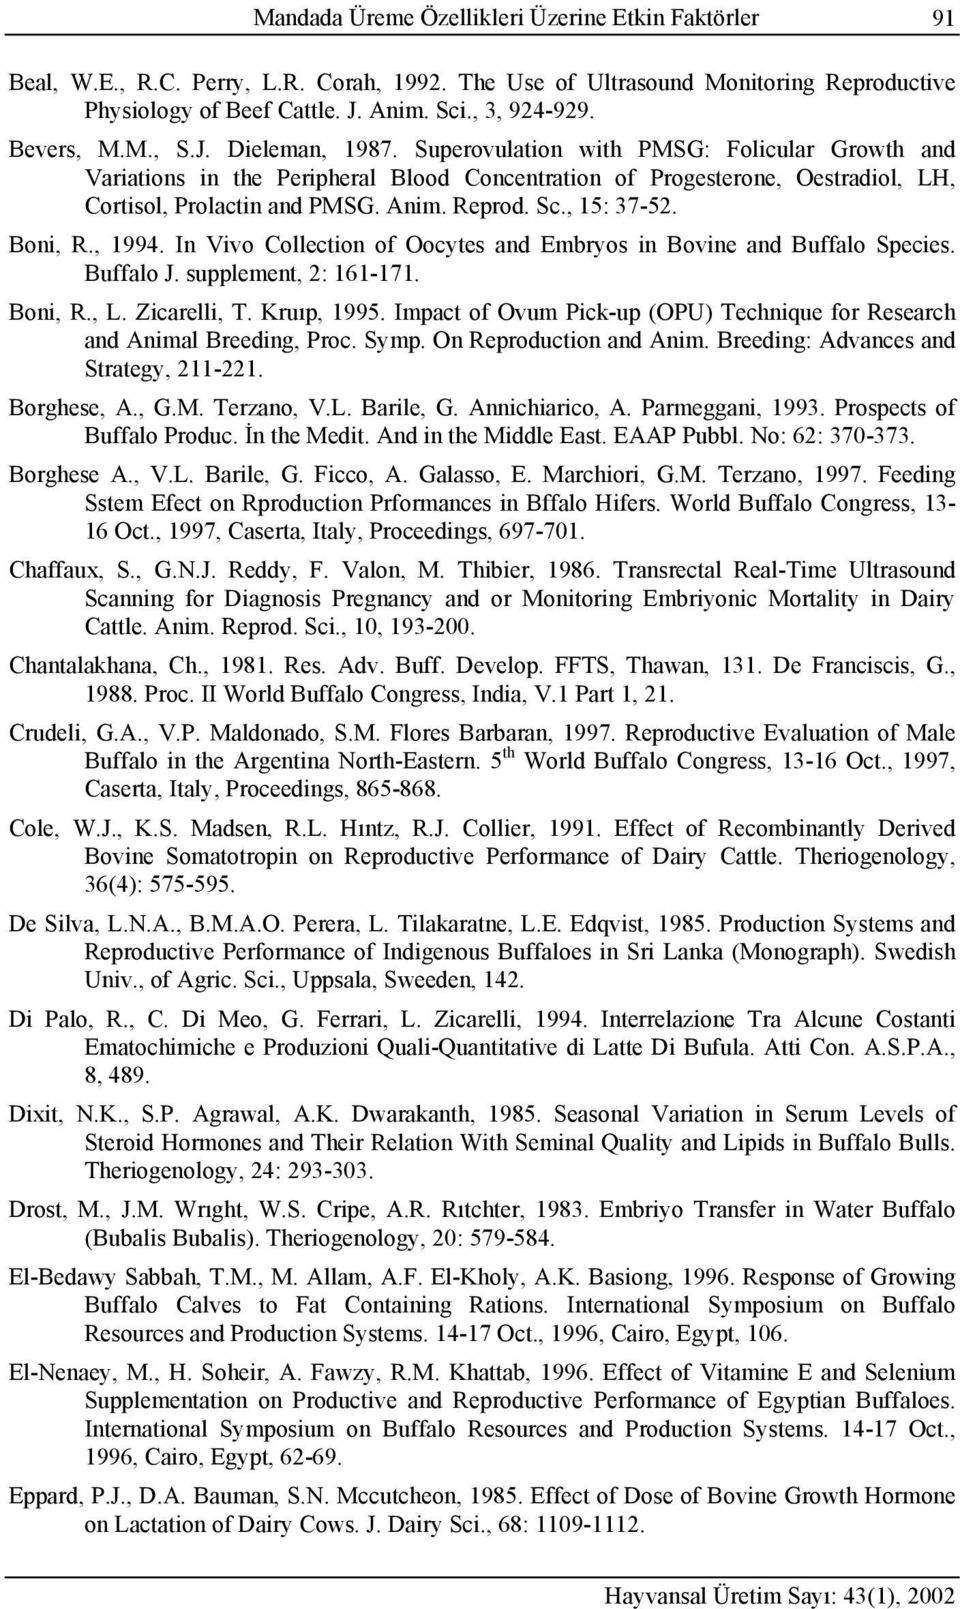 Reprod. Sc., 15: 37-52. Boni, R., 1994. In Vivo Collection of Oocytes and Embryos in Bovine and Buffalo Species. Buffalo J. supplement, 2: 161-171. Boni, R., L. Zicarelli, T. Kruıp, 1995.